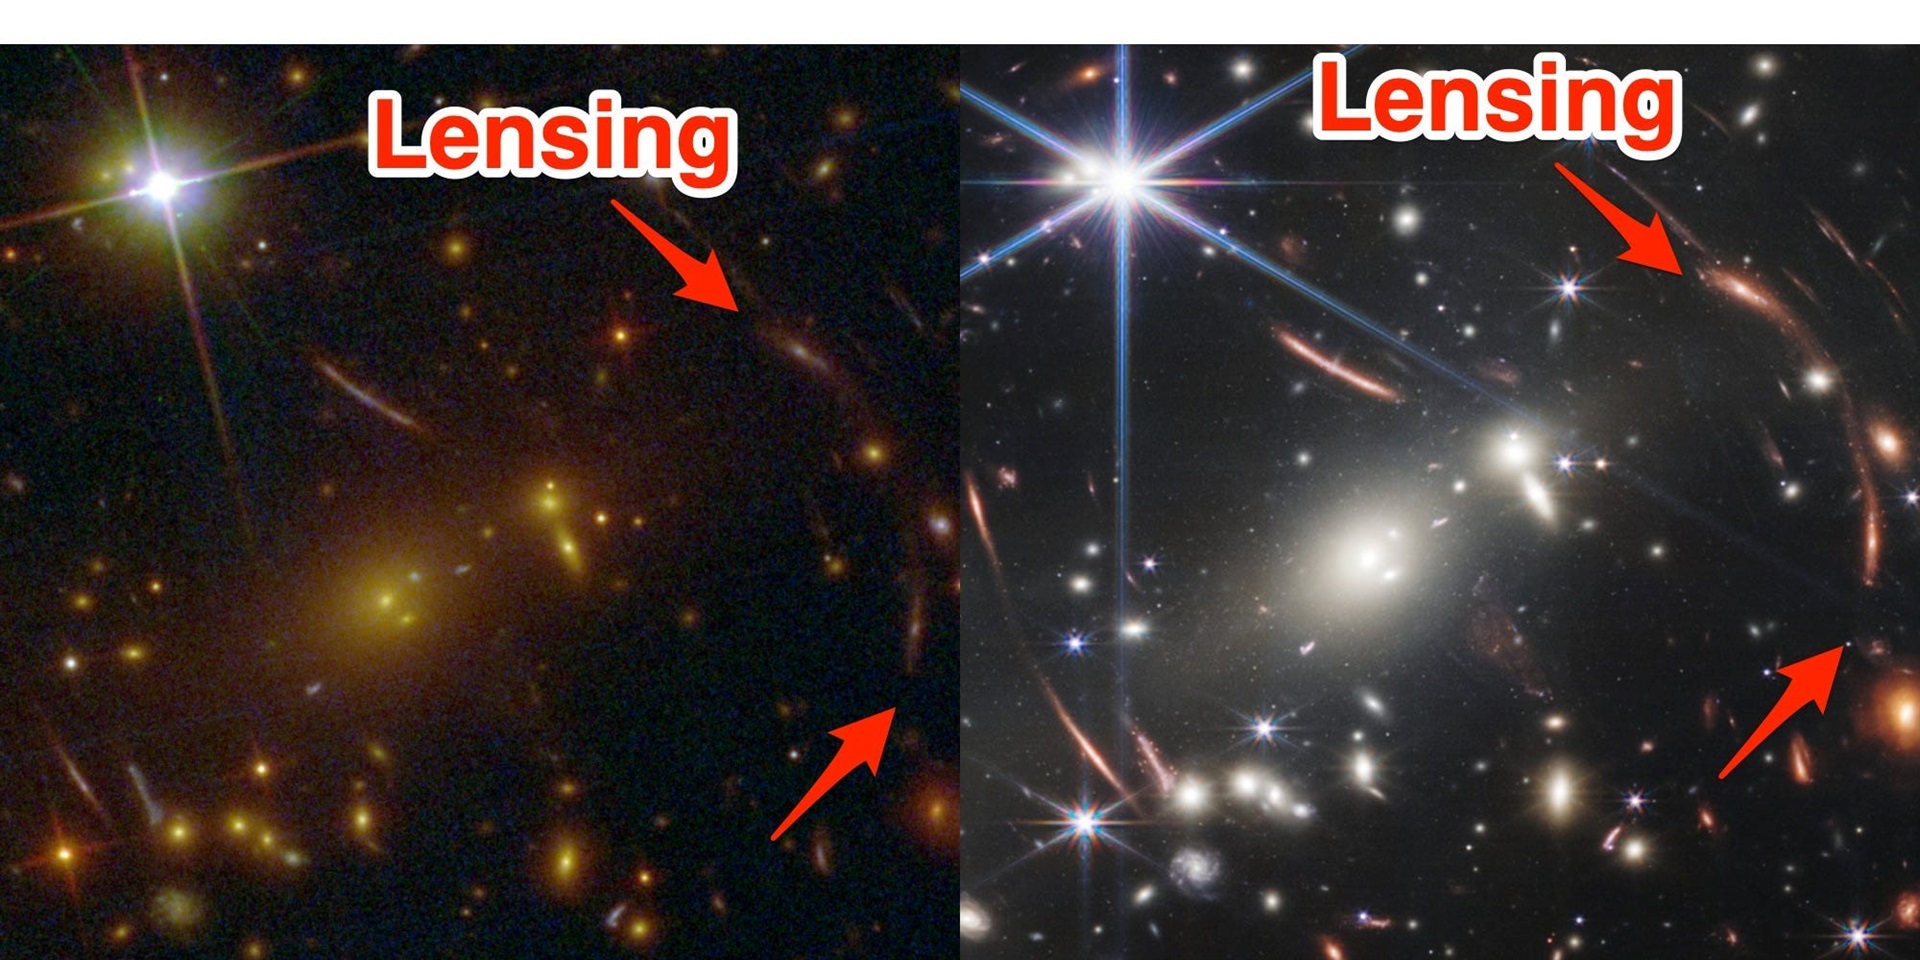 Lensing is seen in this area. Hubble space telescope picture is shown on the left, JWST picture on the right.